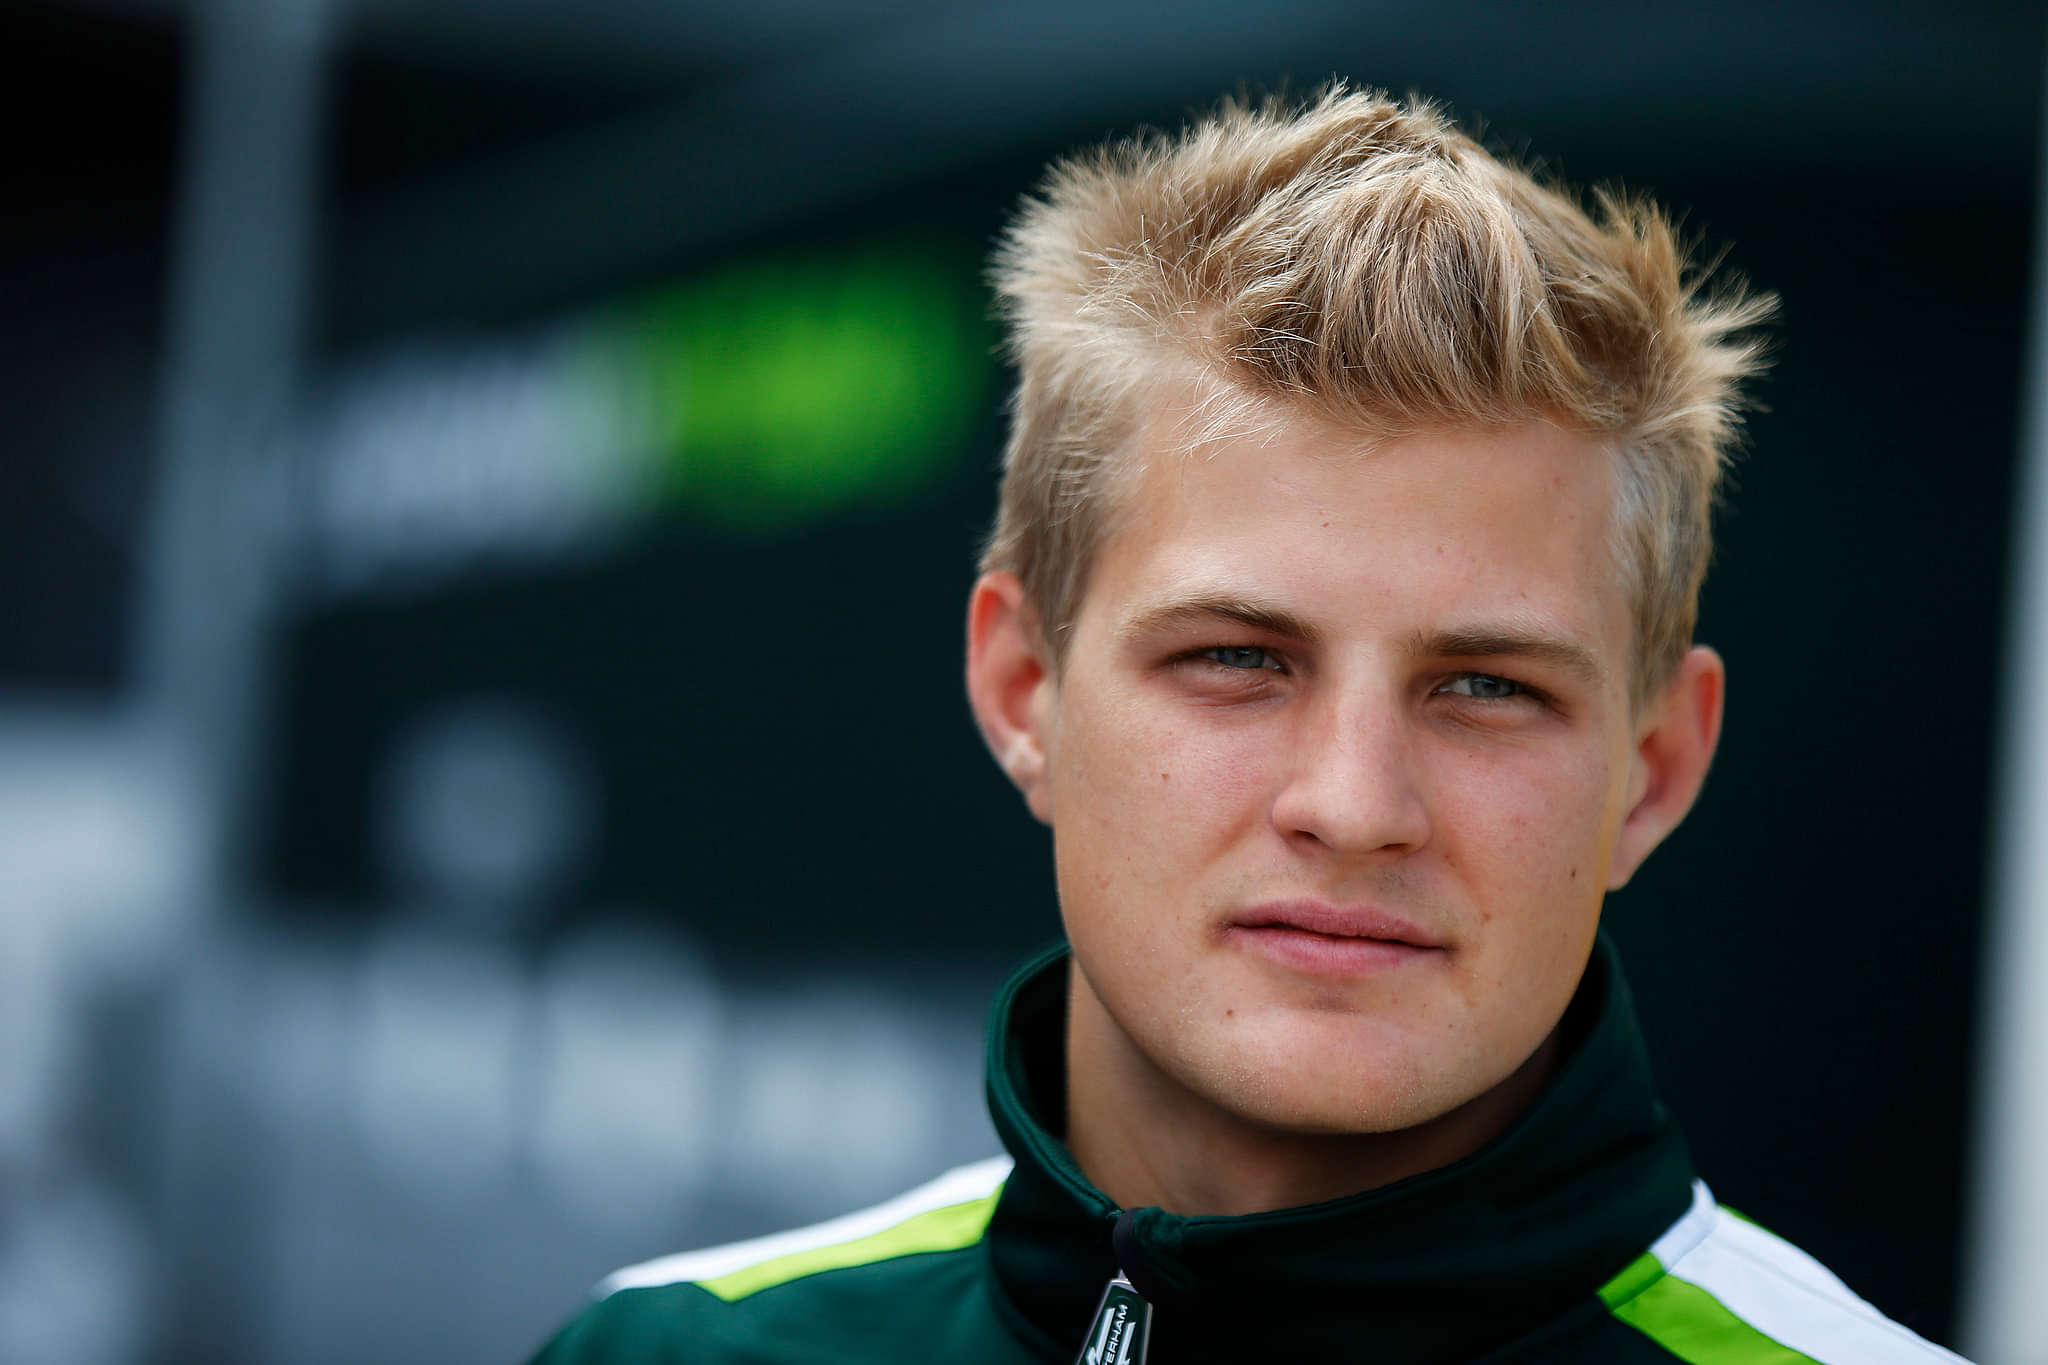 Marcus Ericsson Latest News from Silverstone